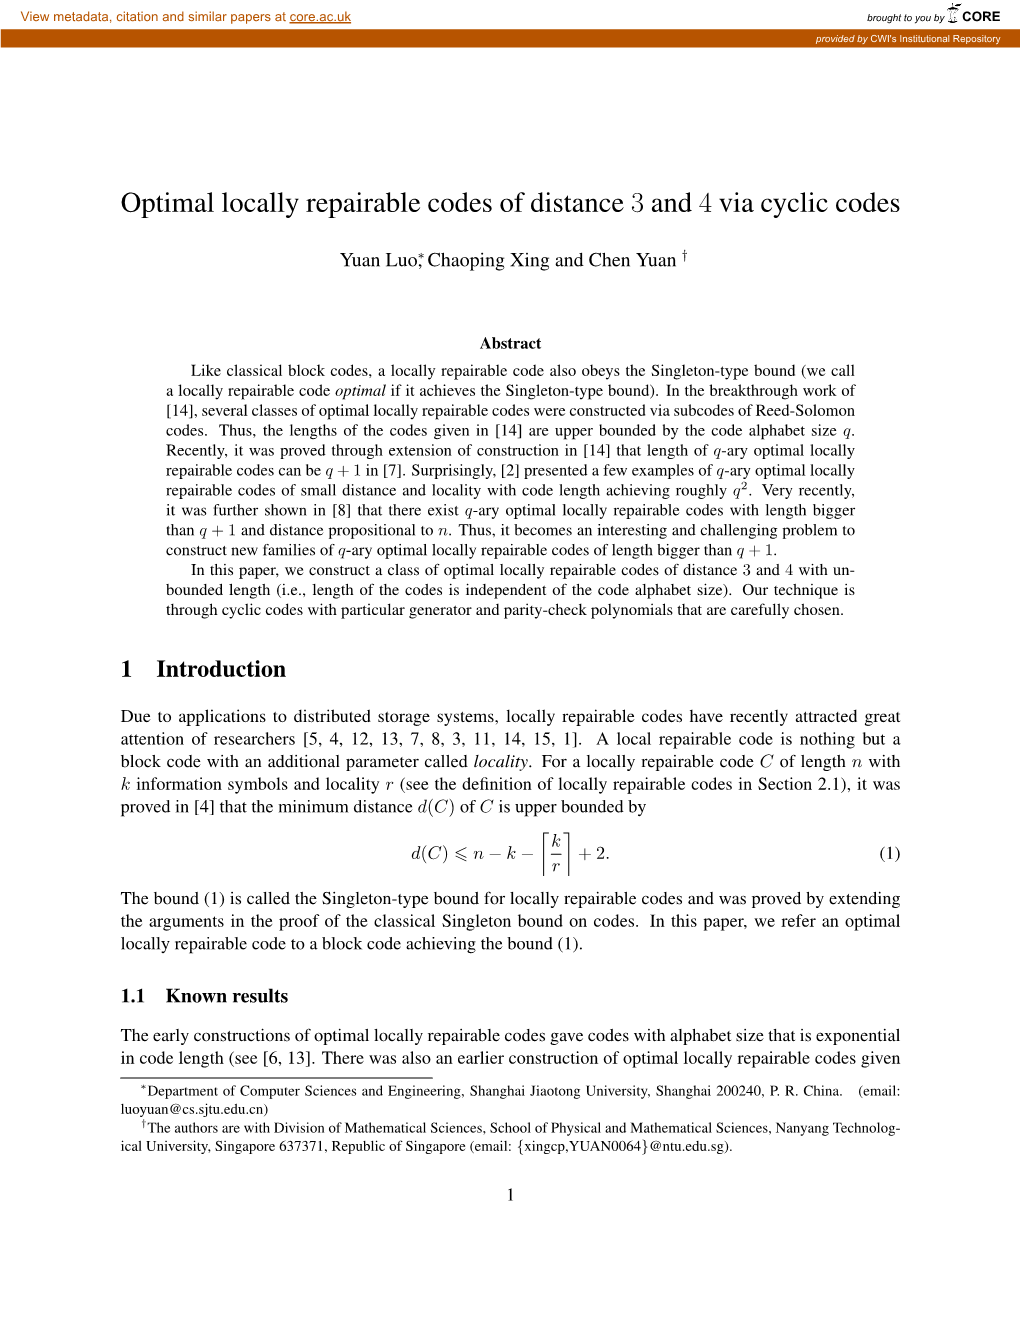 Optimal Locally Repairable Codes of Distance 3 and 4 Via Cyclic Codes